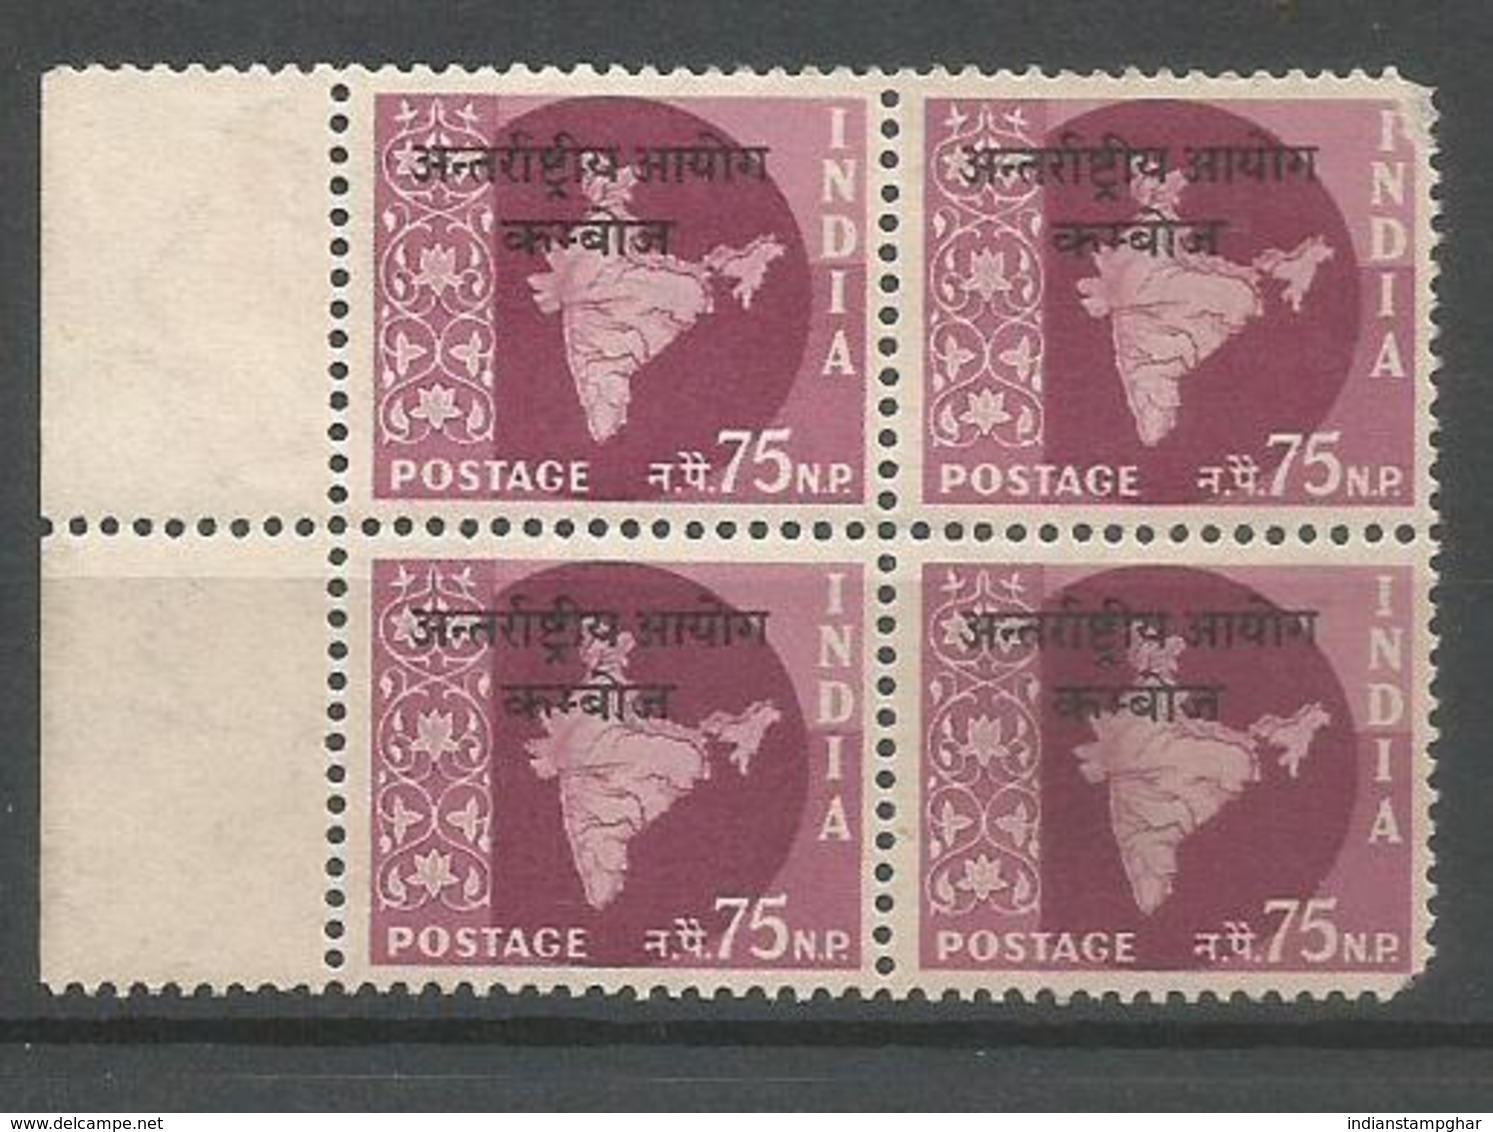 Cambodia Opvt. On 75np Map, Block Of 4,MNH 1962 Star Wmk, Military Stamps, As Per Scan - Militaire Vrijstelling Van Portkosten